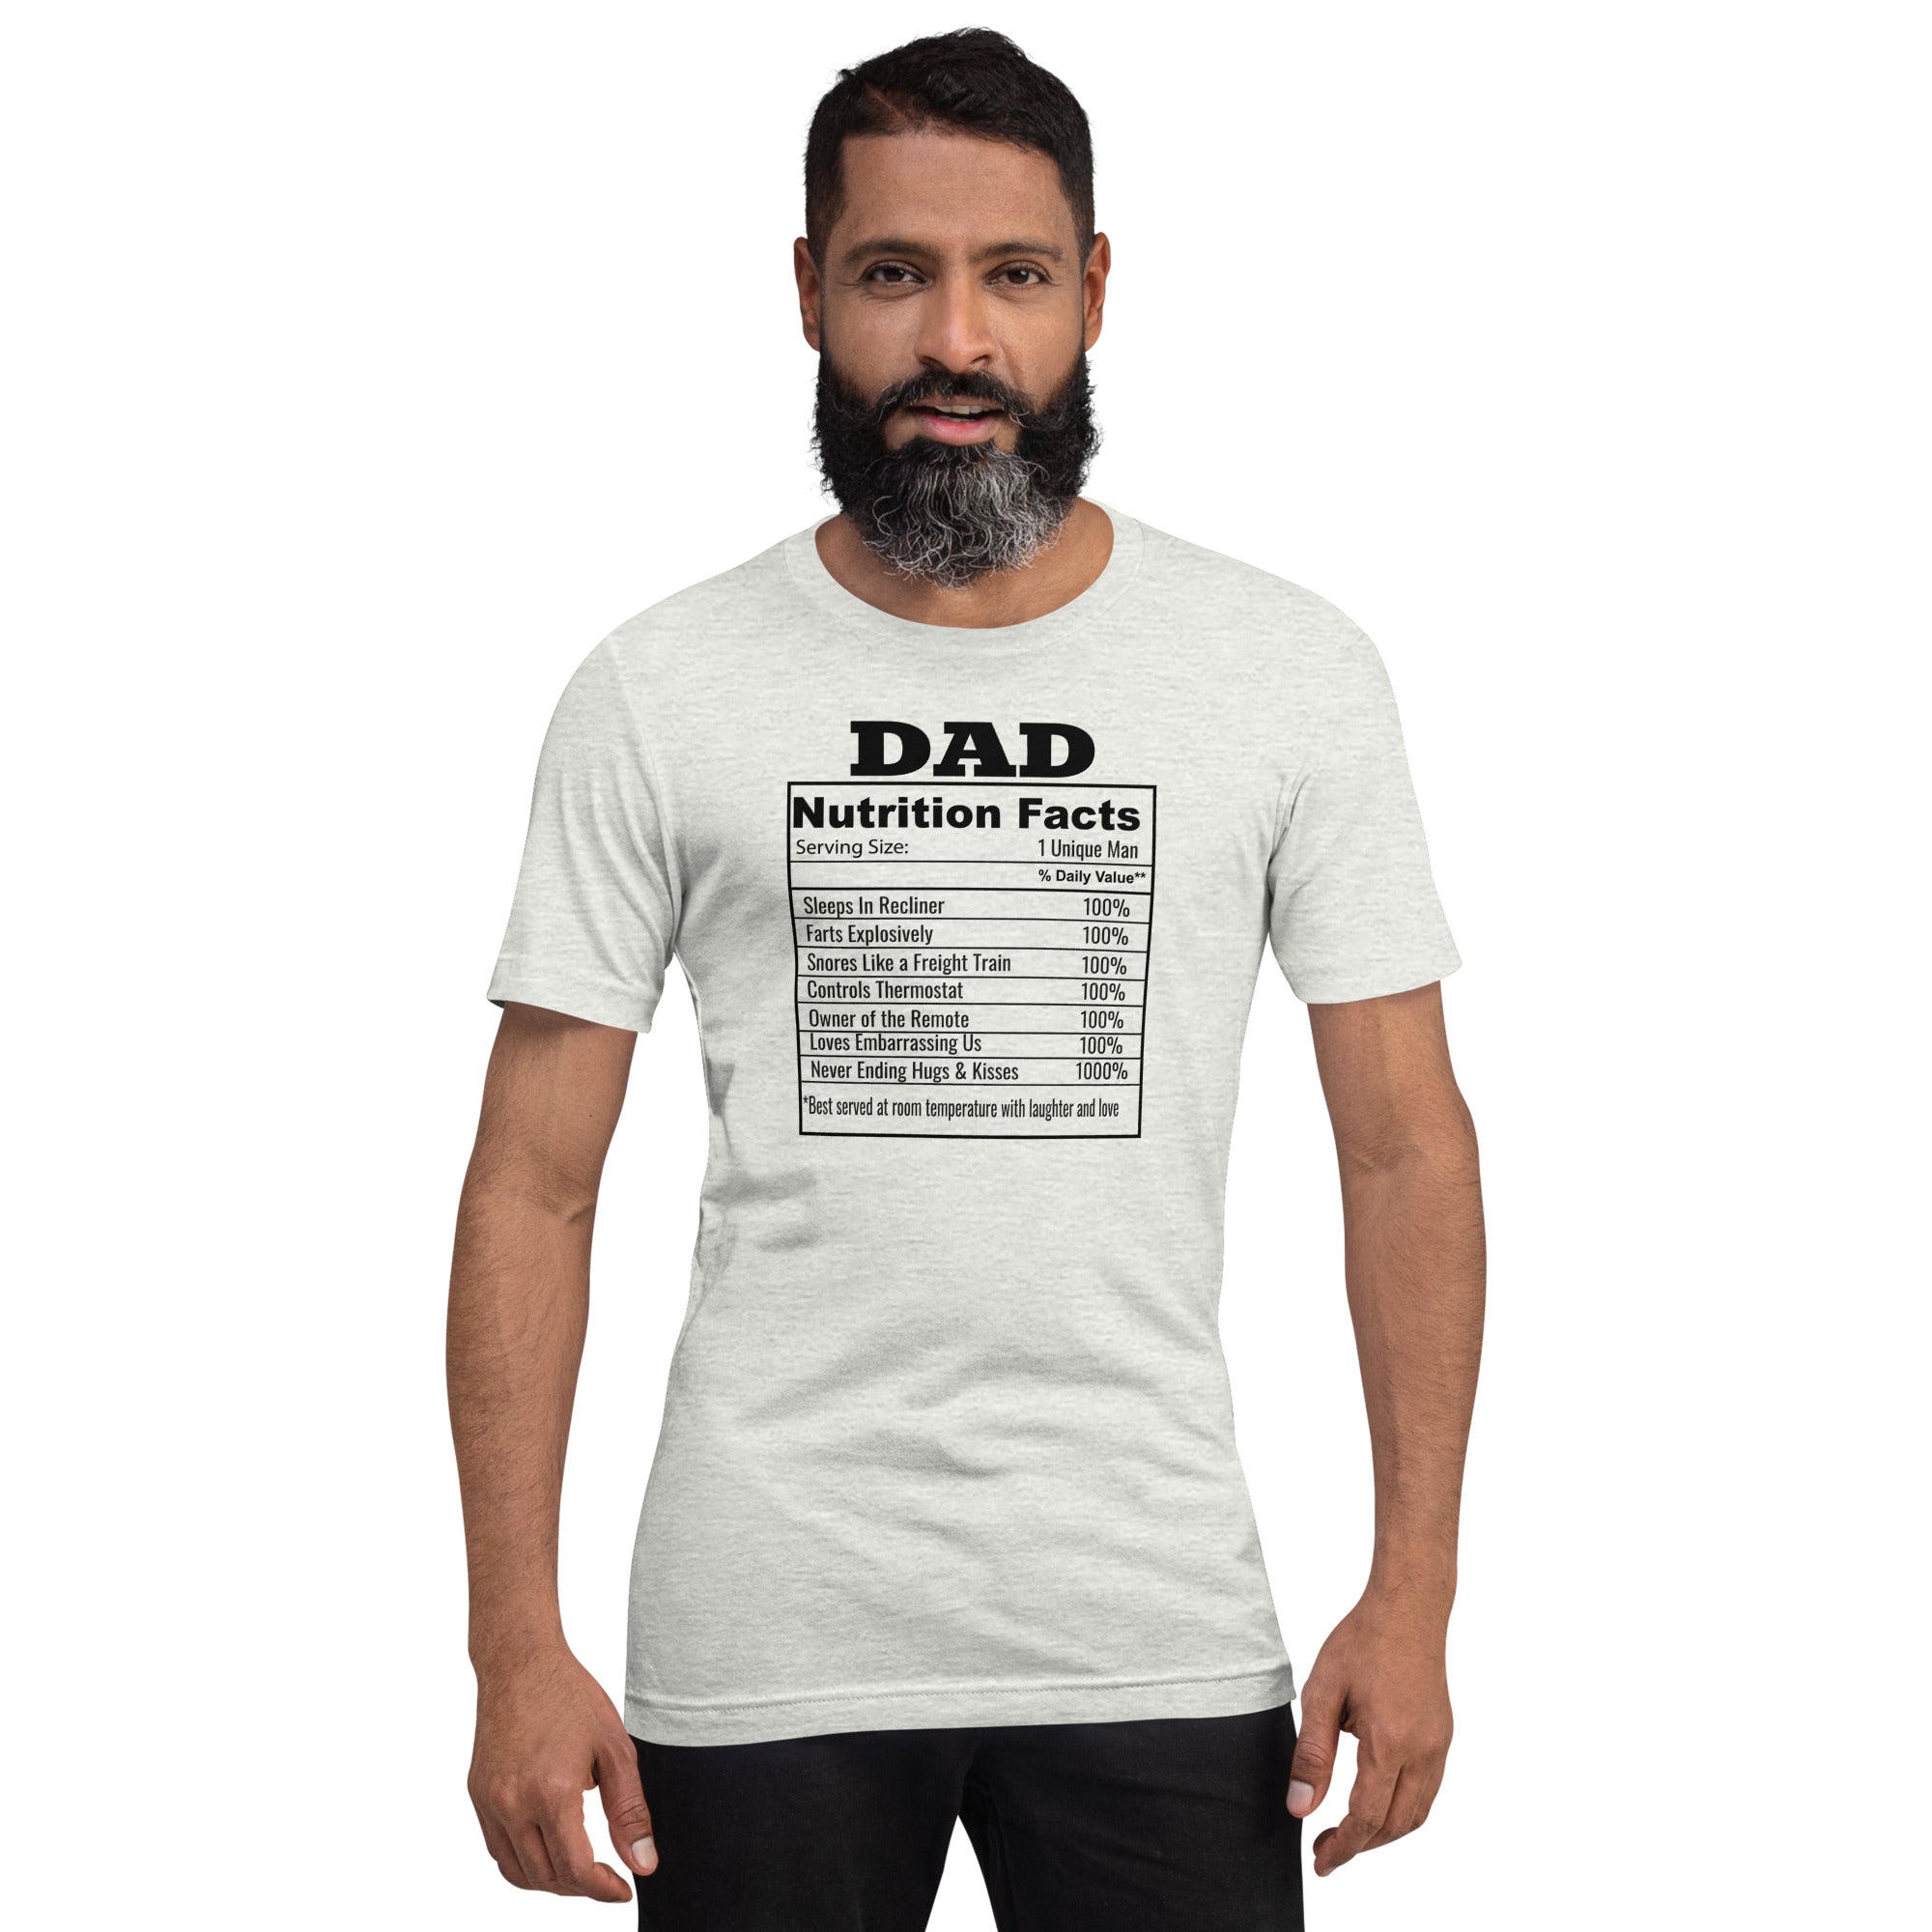 Funny Father's Day Nutrition Facts T-Shirt That Says Dad Snores, Farts and More